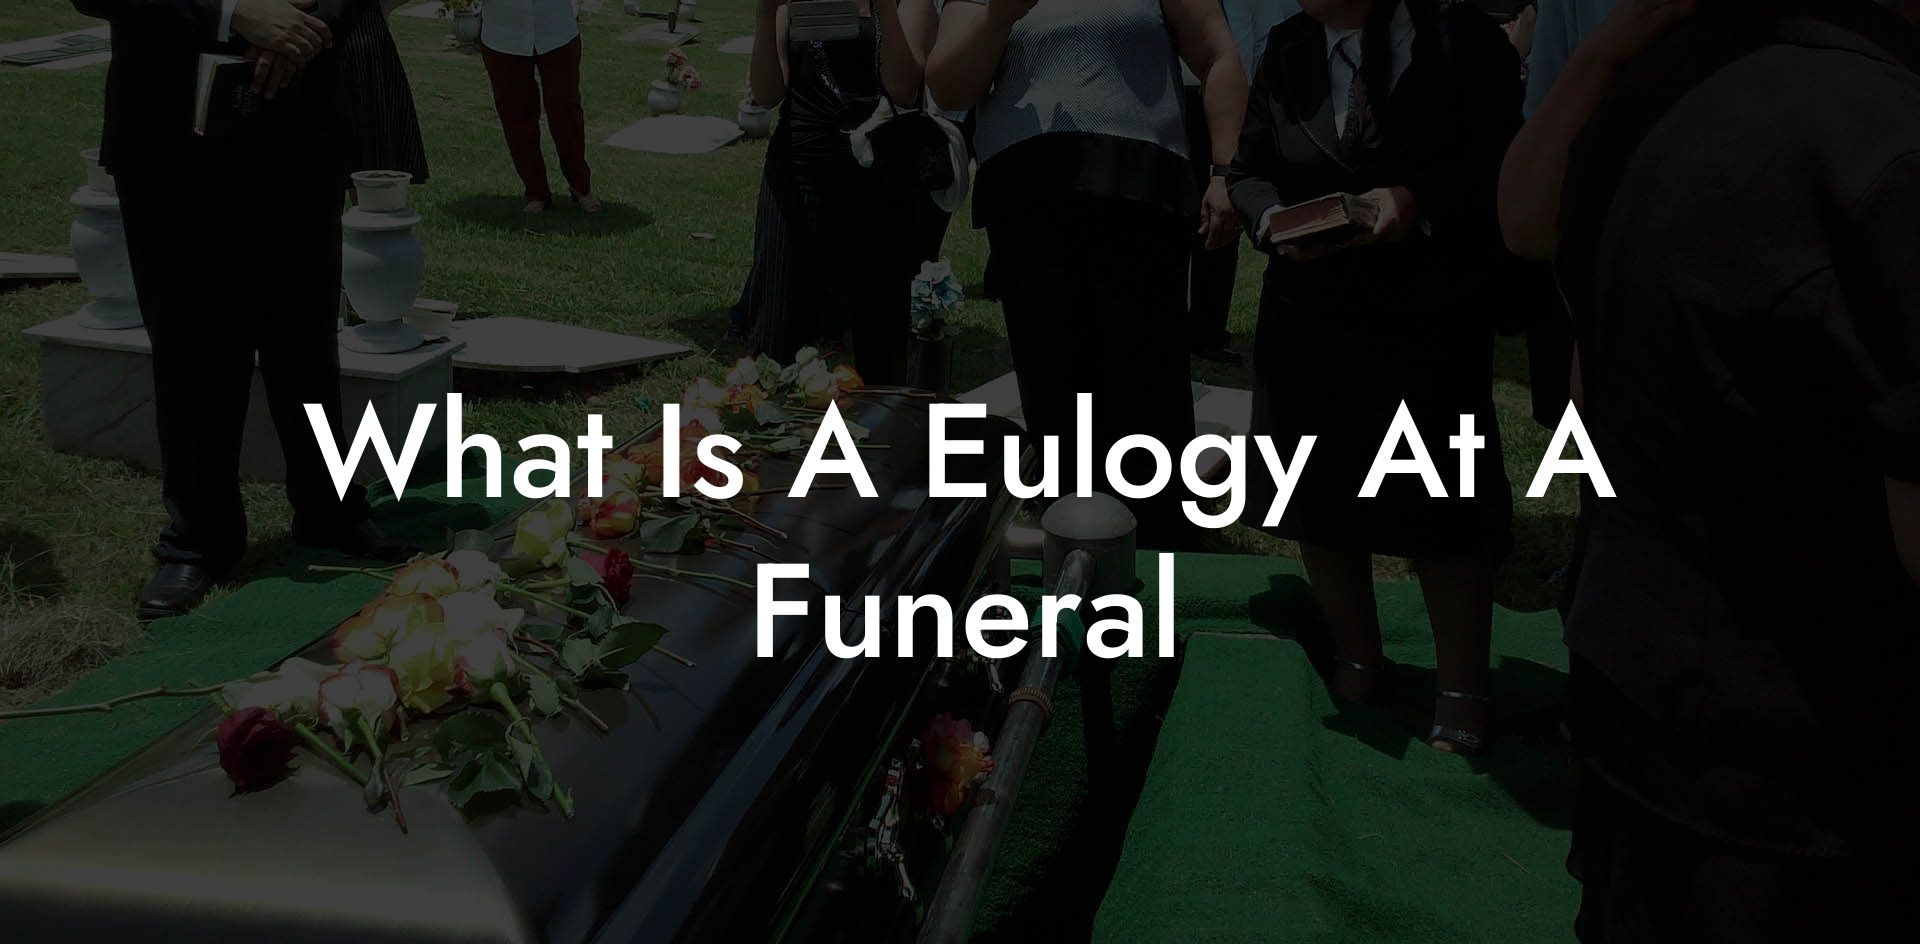 What Is A Eulogy At A Funeral?